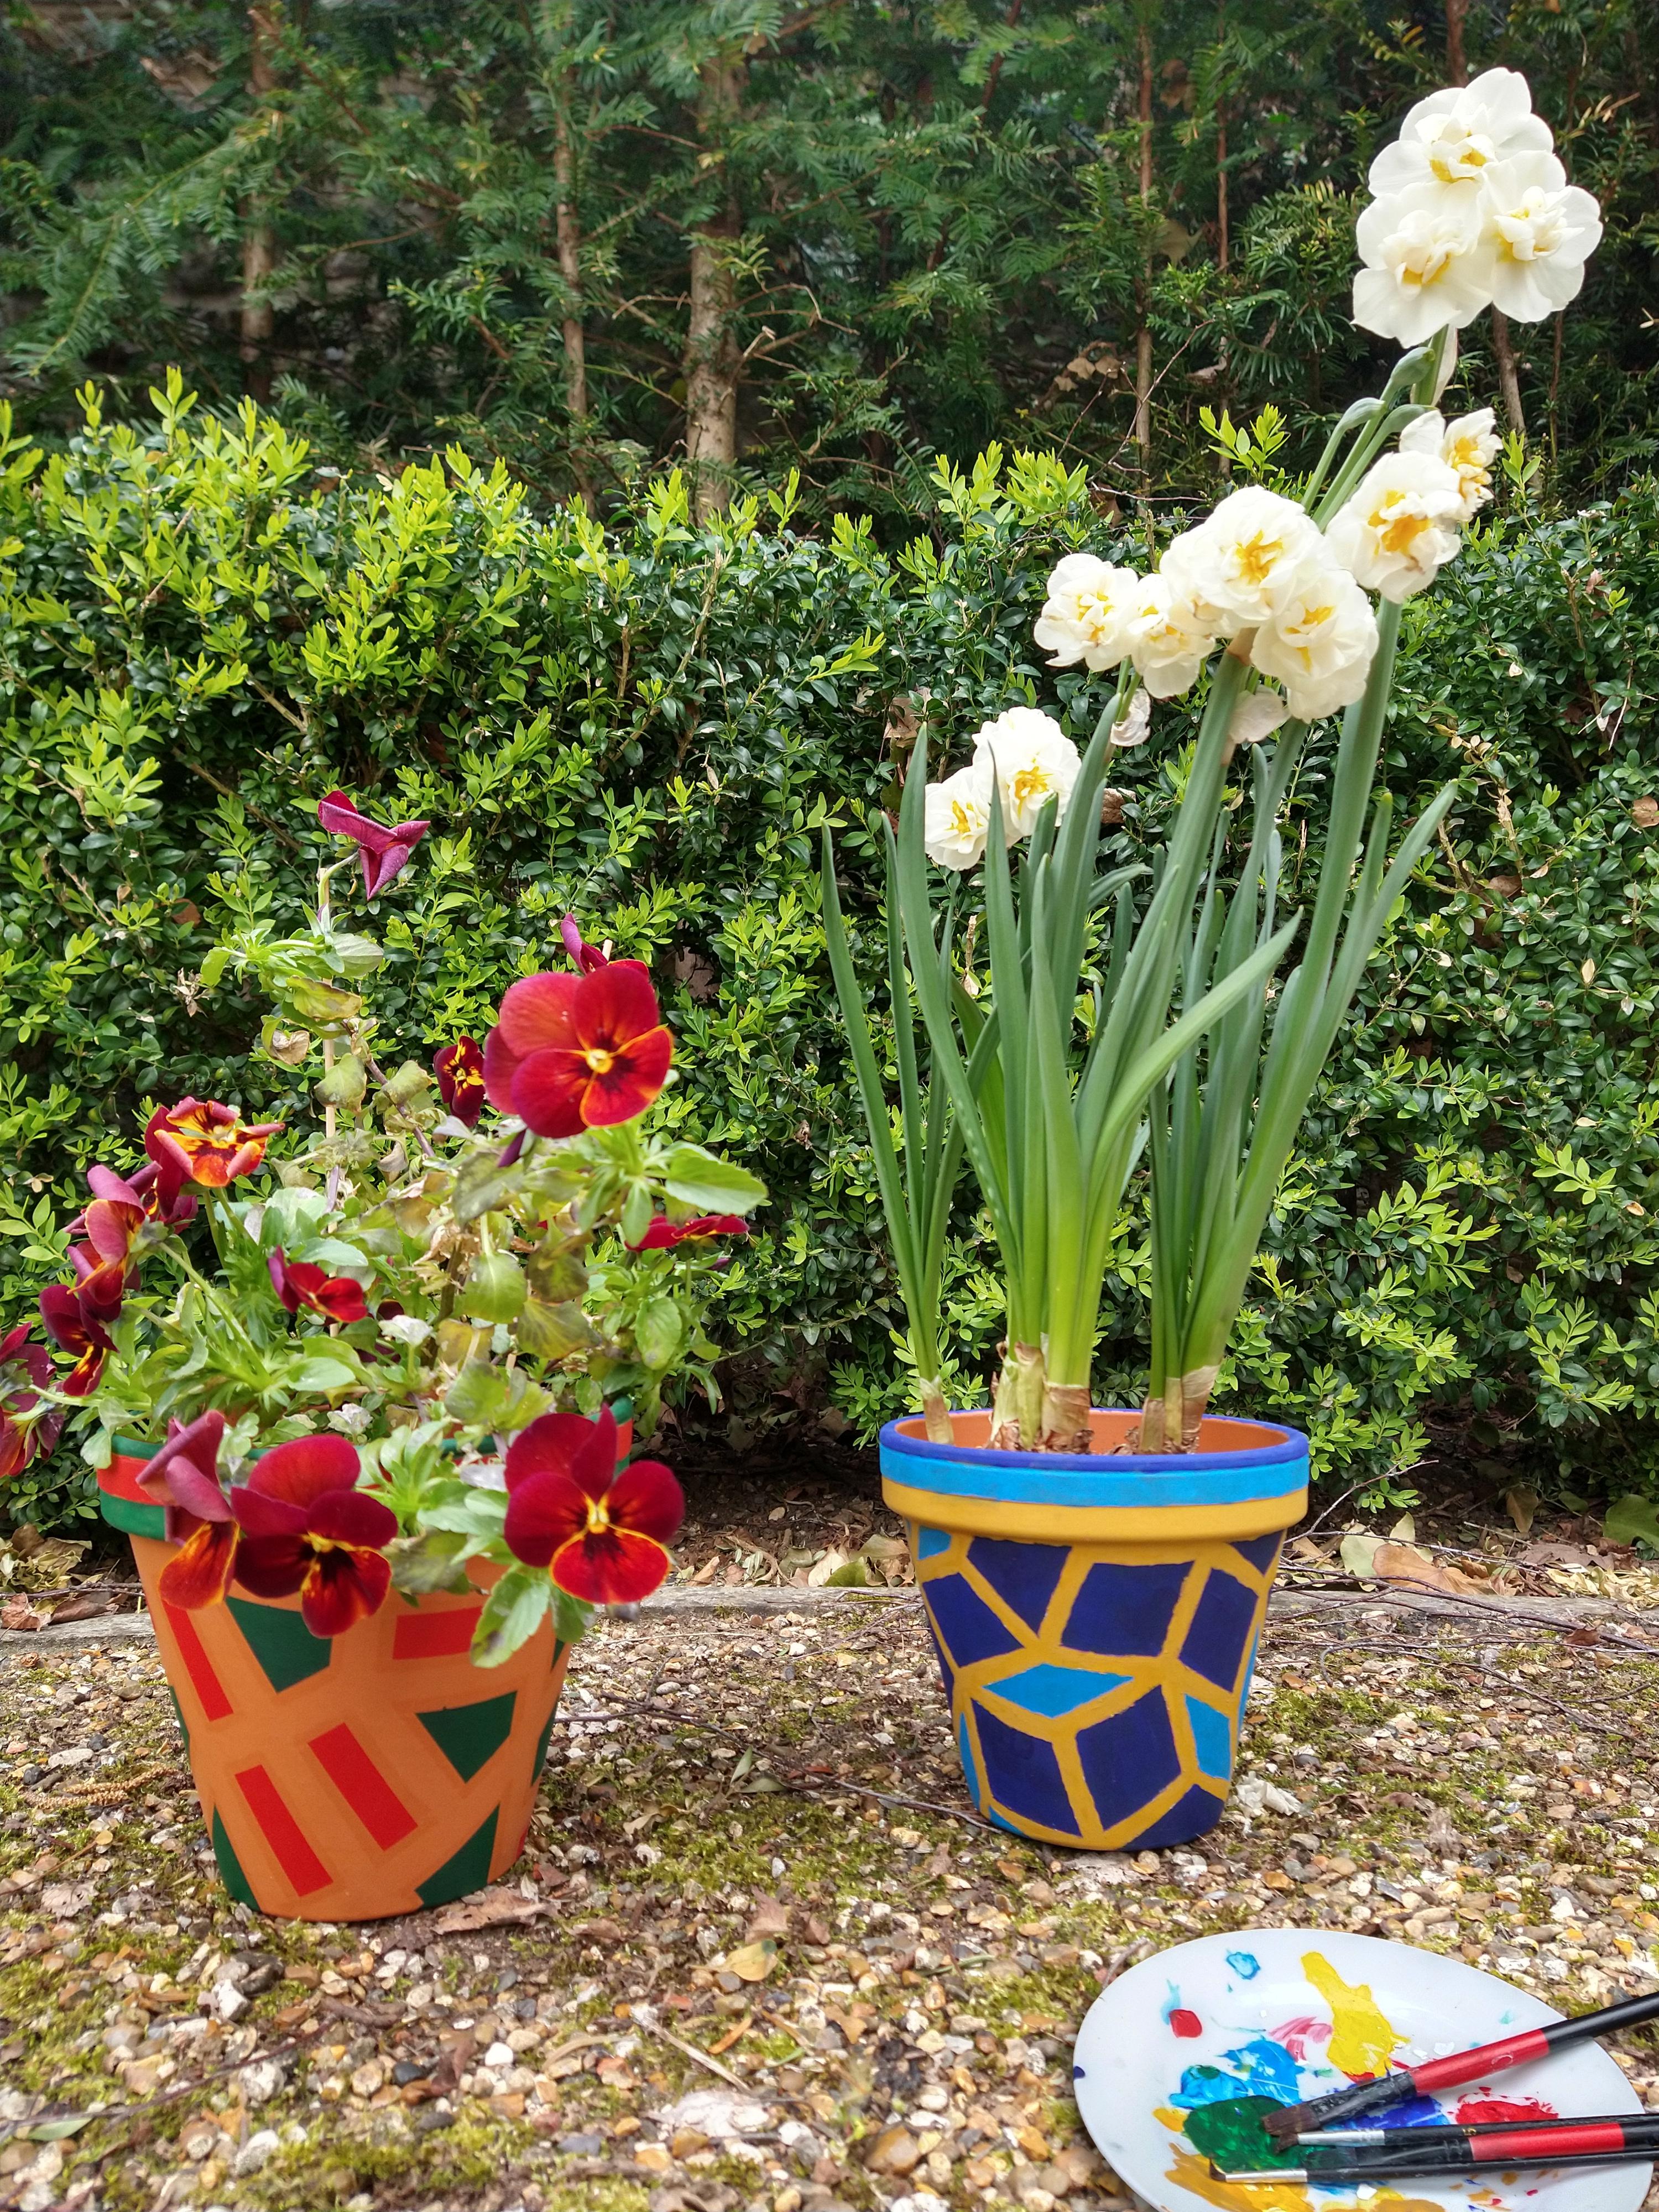 Flower pots painted in bright colours with aperiodic tiling patterns.